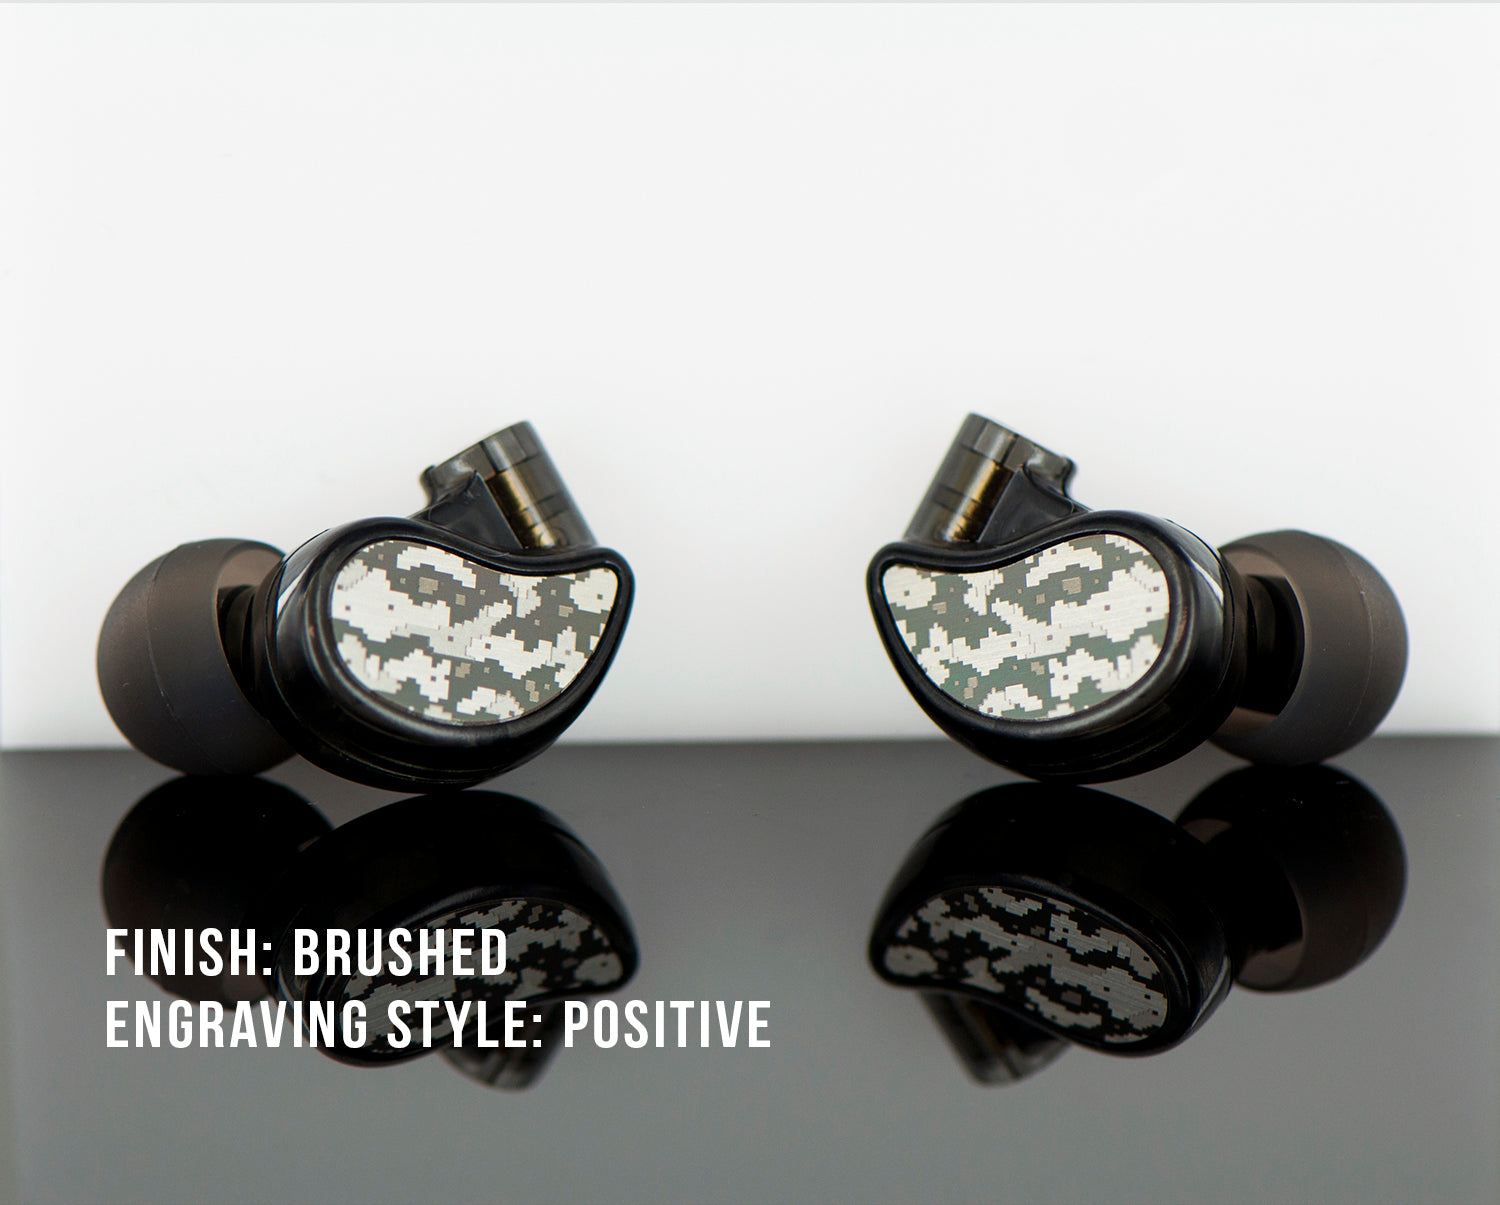 Two camouflage-patterned in-ear monitors displayed on a glossy surface with text describing them as having a brushed finish and positive engraving style.